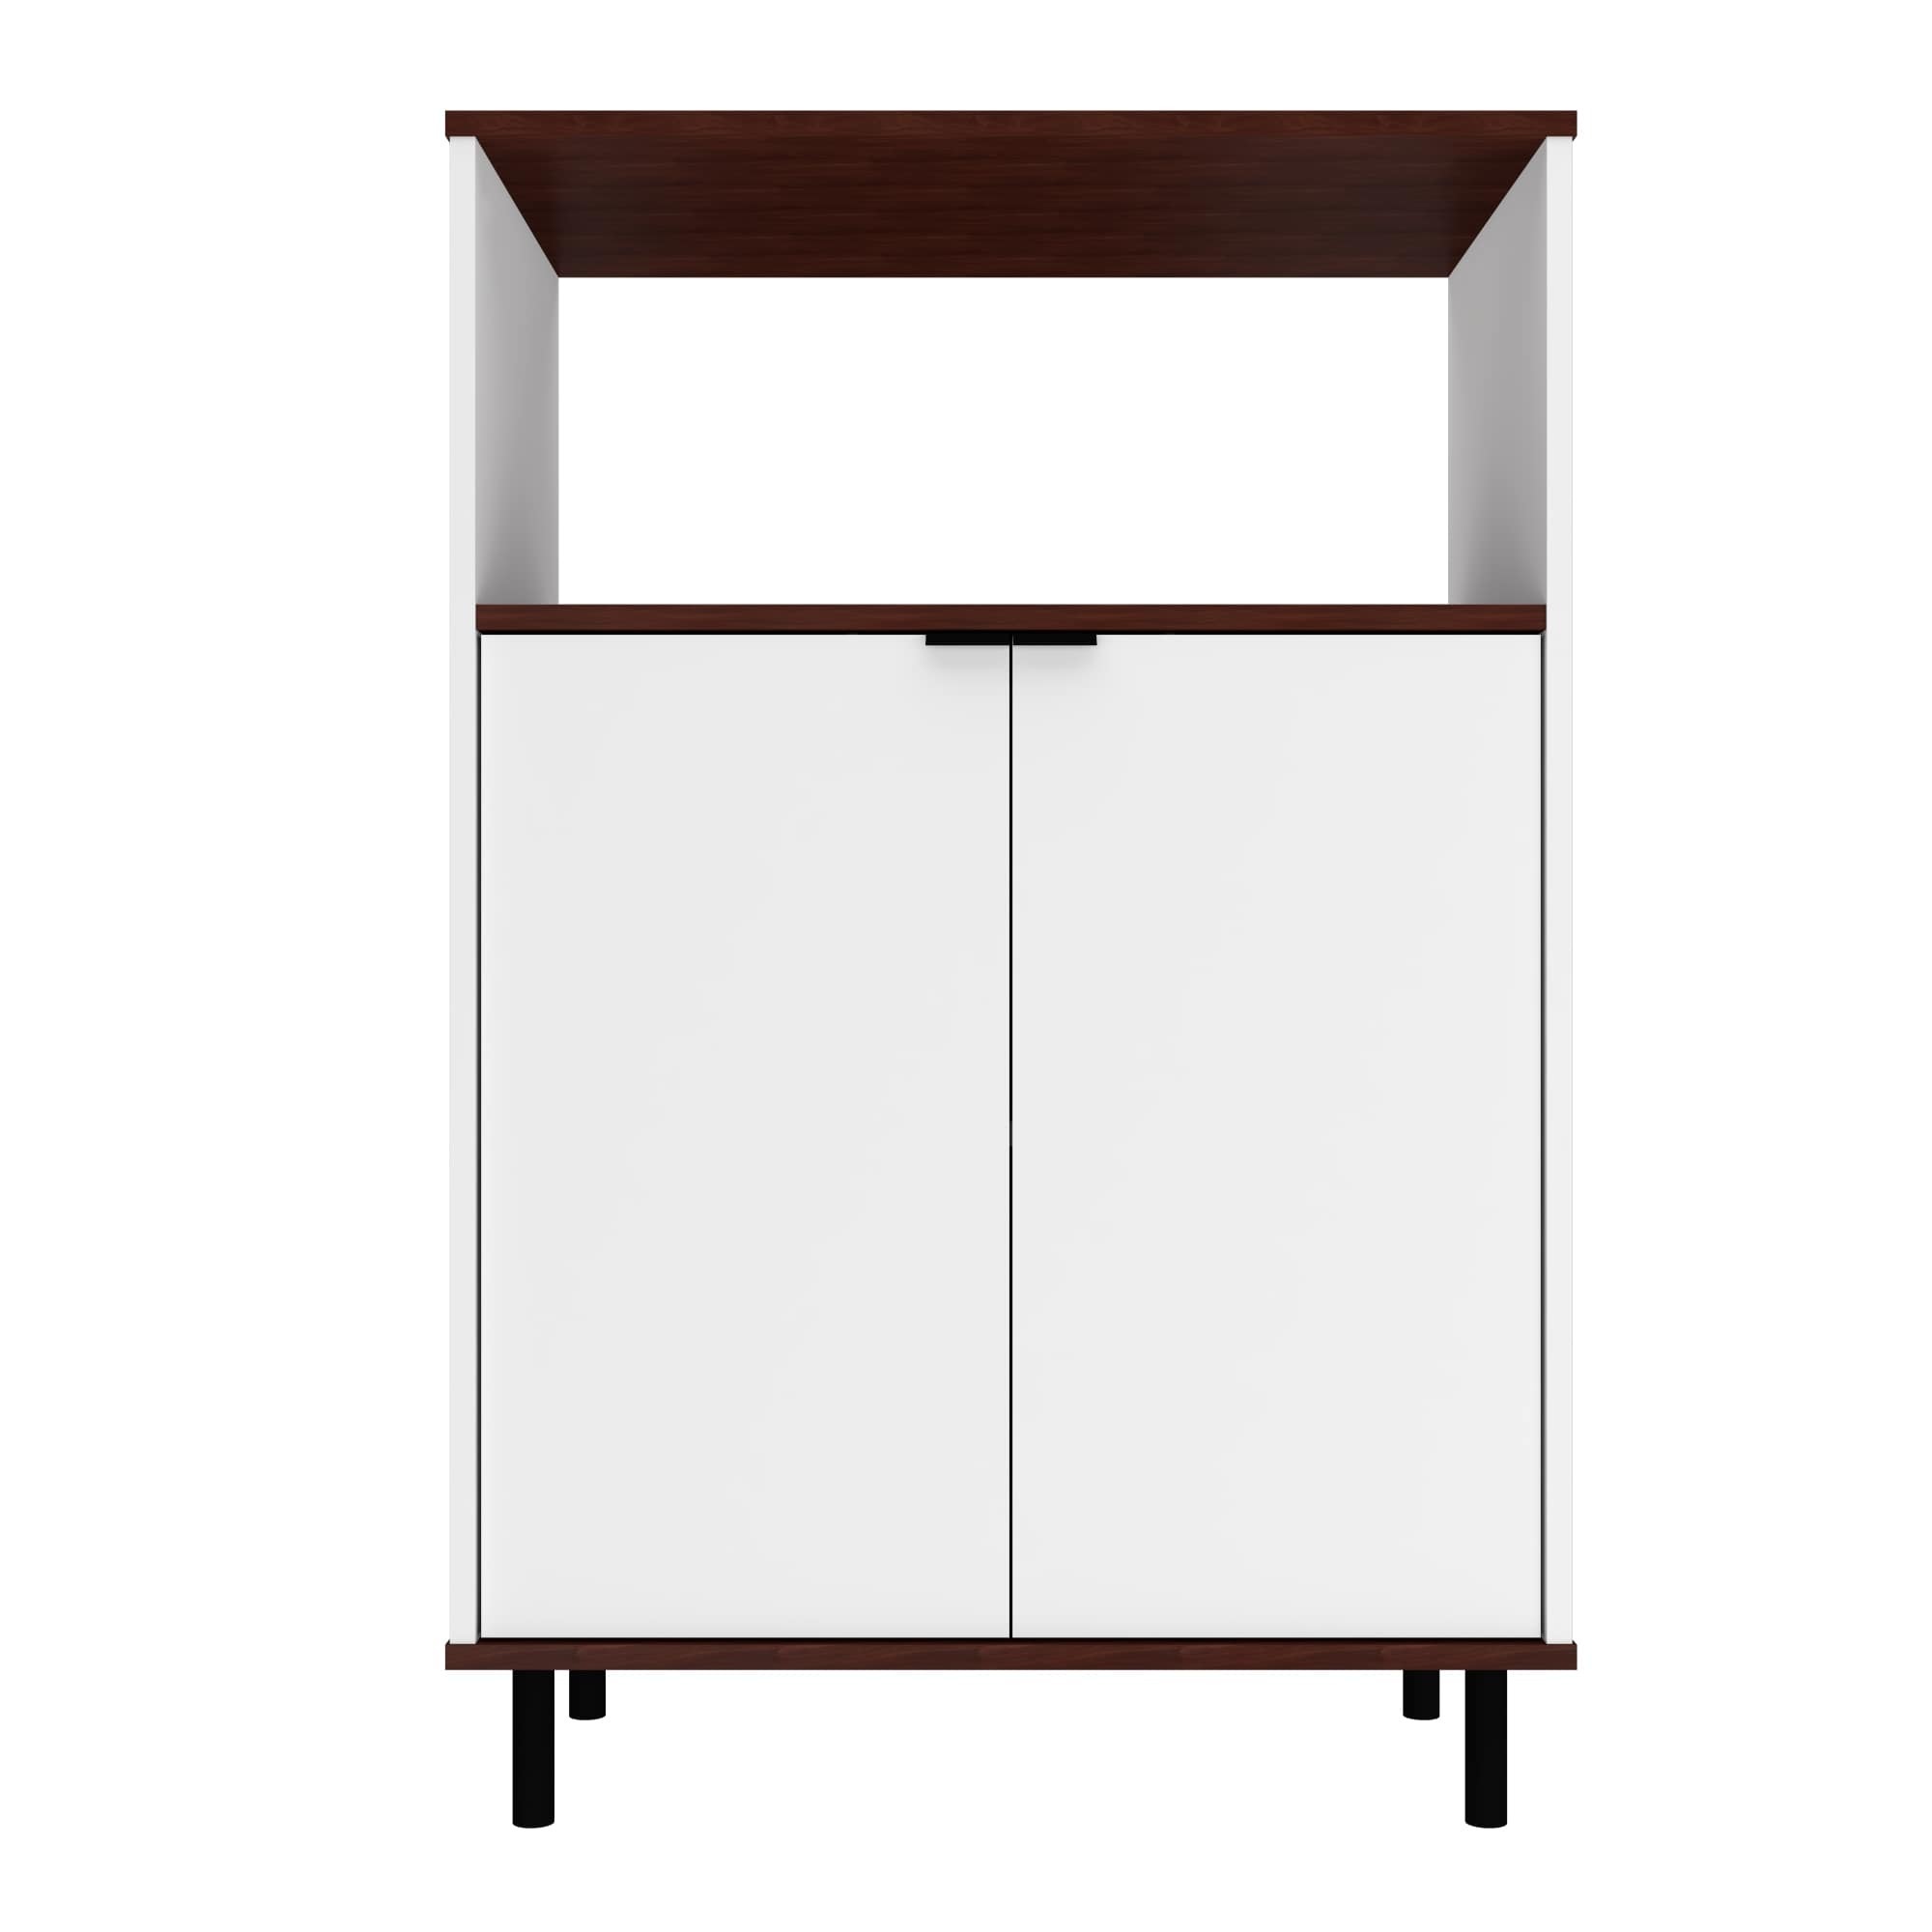 Manhattan Comfort, Mosholu Accent Cabinet 3 Shelves White and Brown, Width 26.57 in, Height 40.78 in, Depth 14.17 in, Model 301AMC